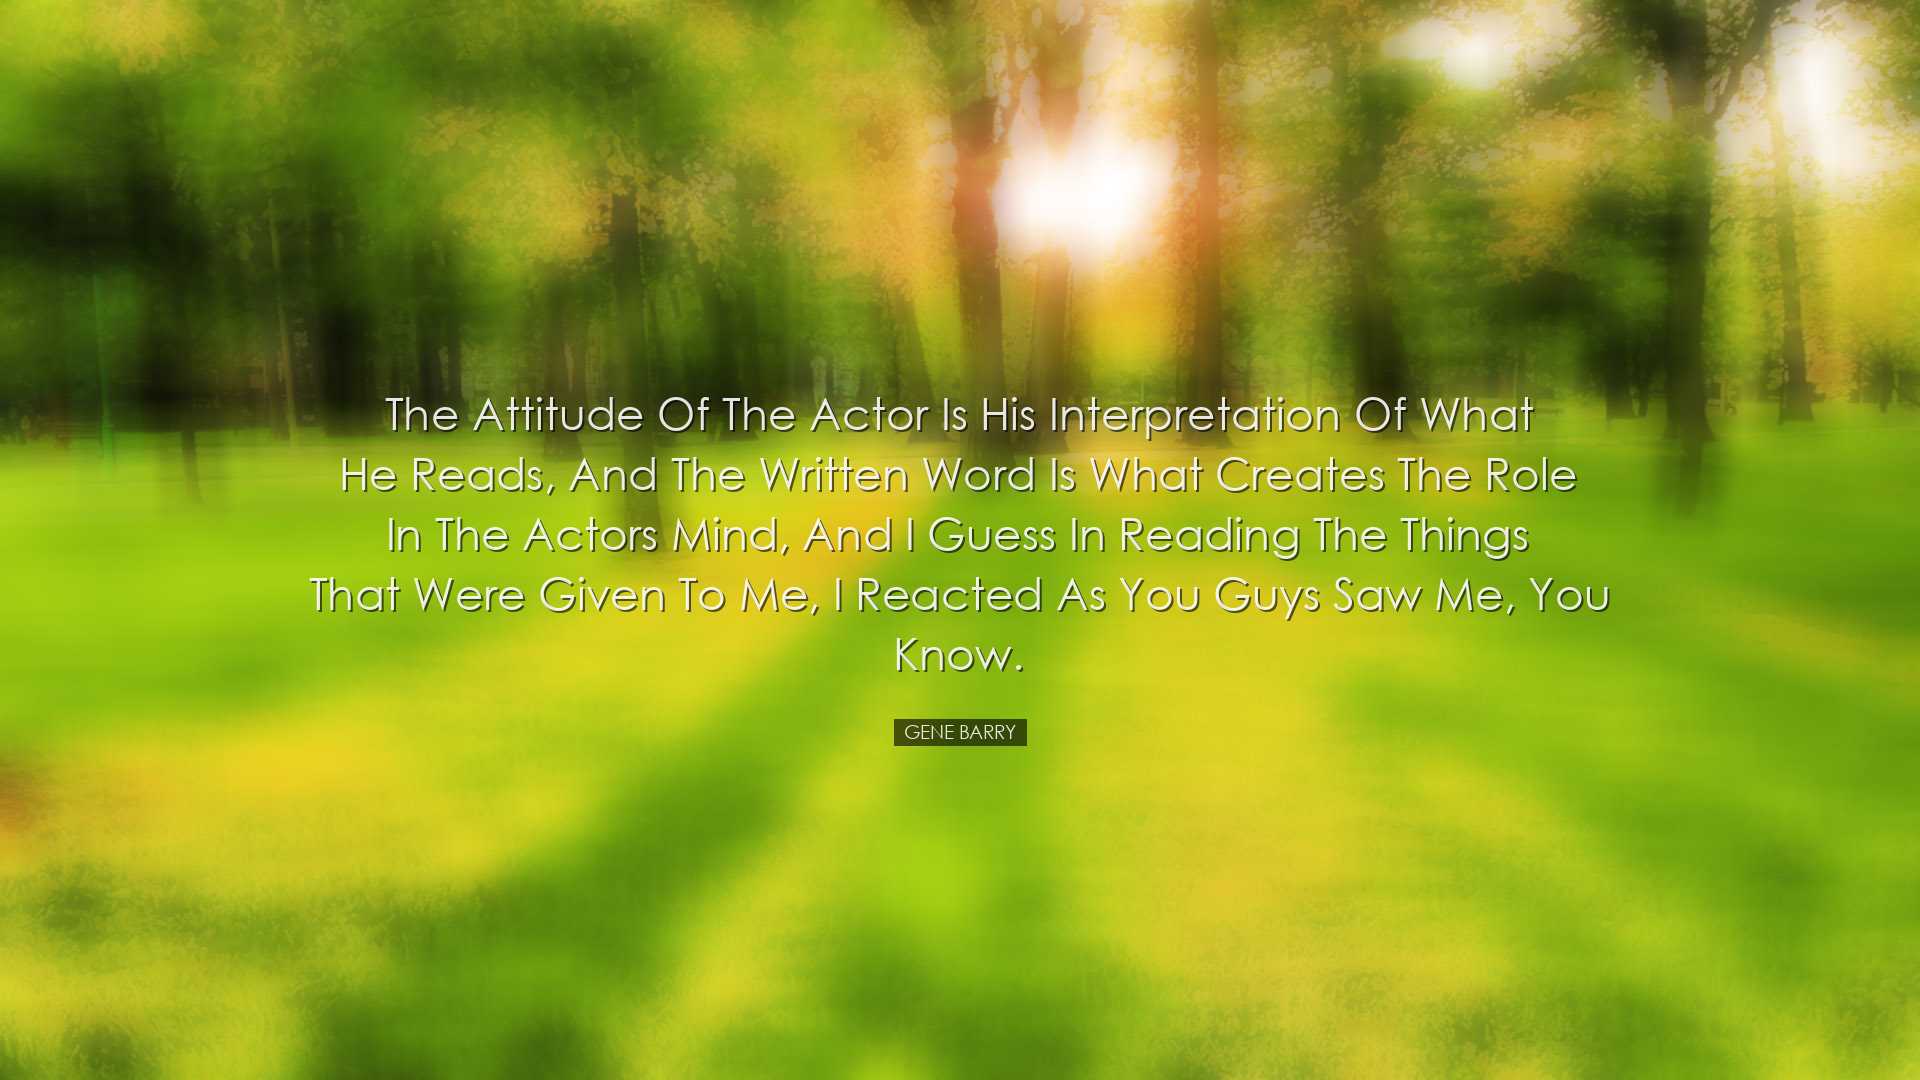 The attitude of the actor is his interpretation of what he reads,